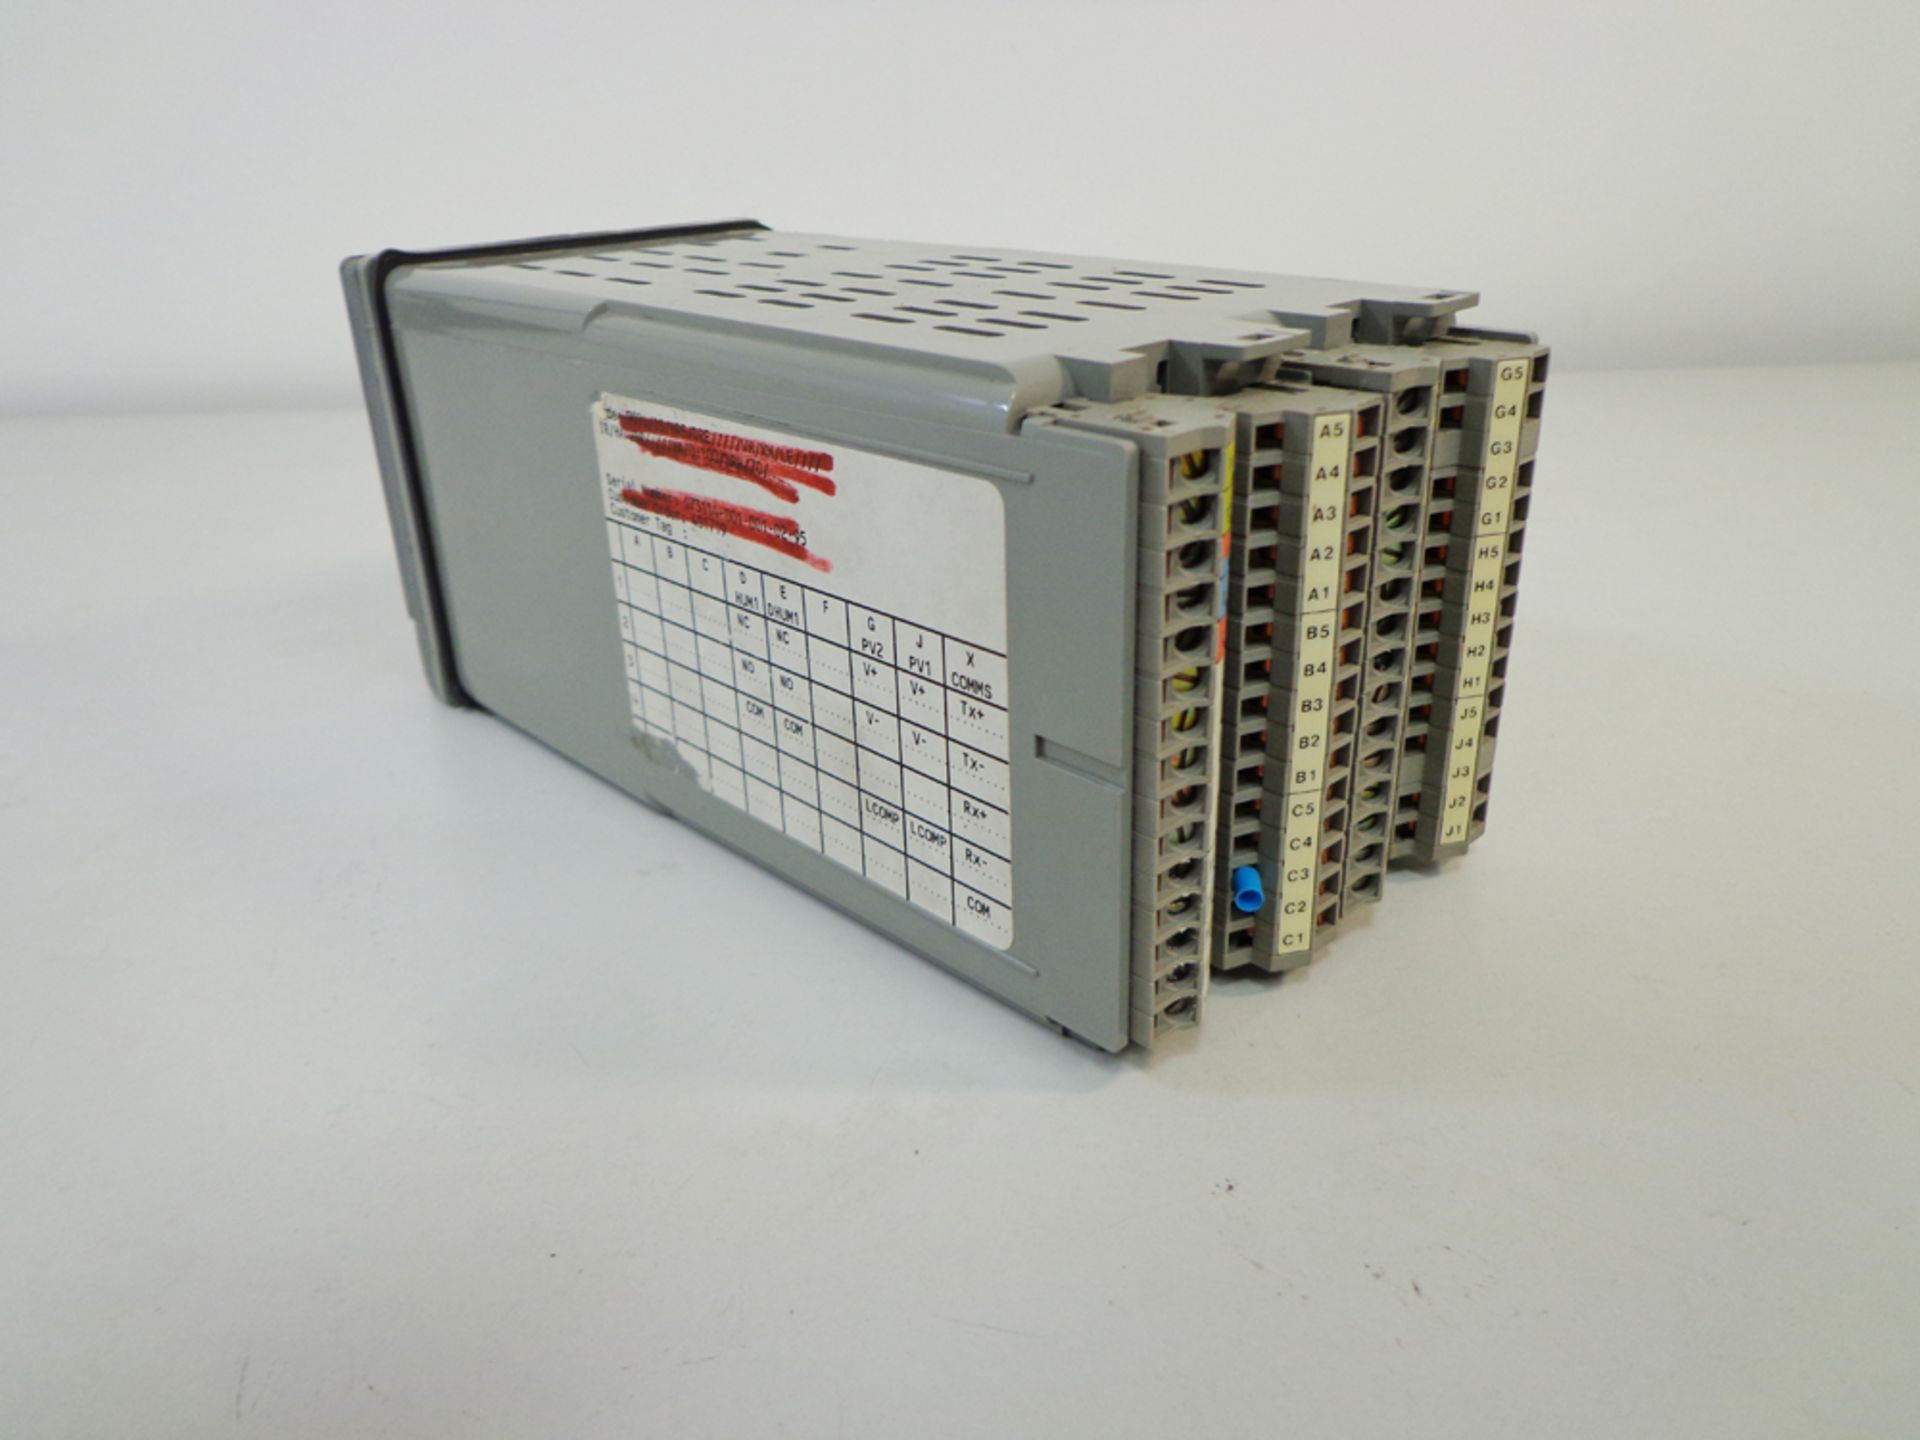 Eurotherm Temperature Controller 907S Hardware, 907S/IS/HRE/DRE/////VH/VH/XM/LE////, S/N G73114- - Image 2 of 5